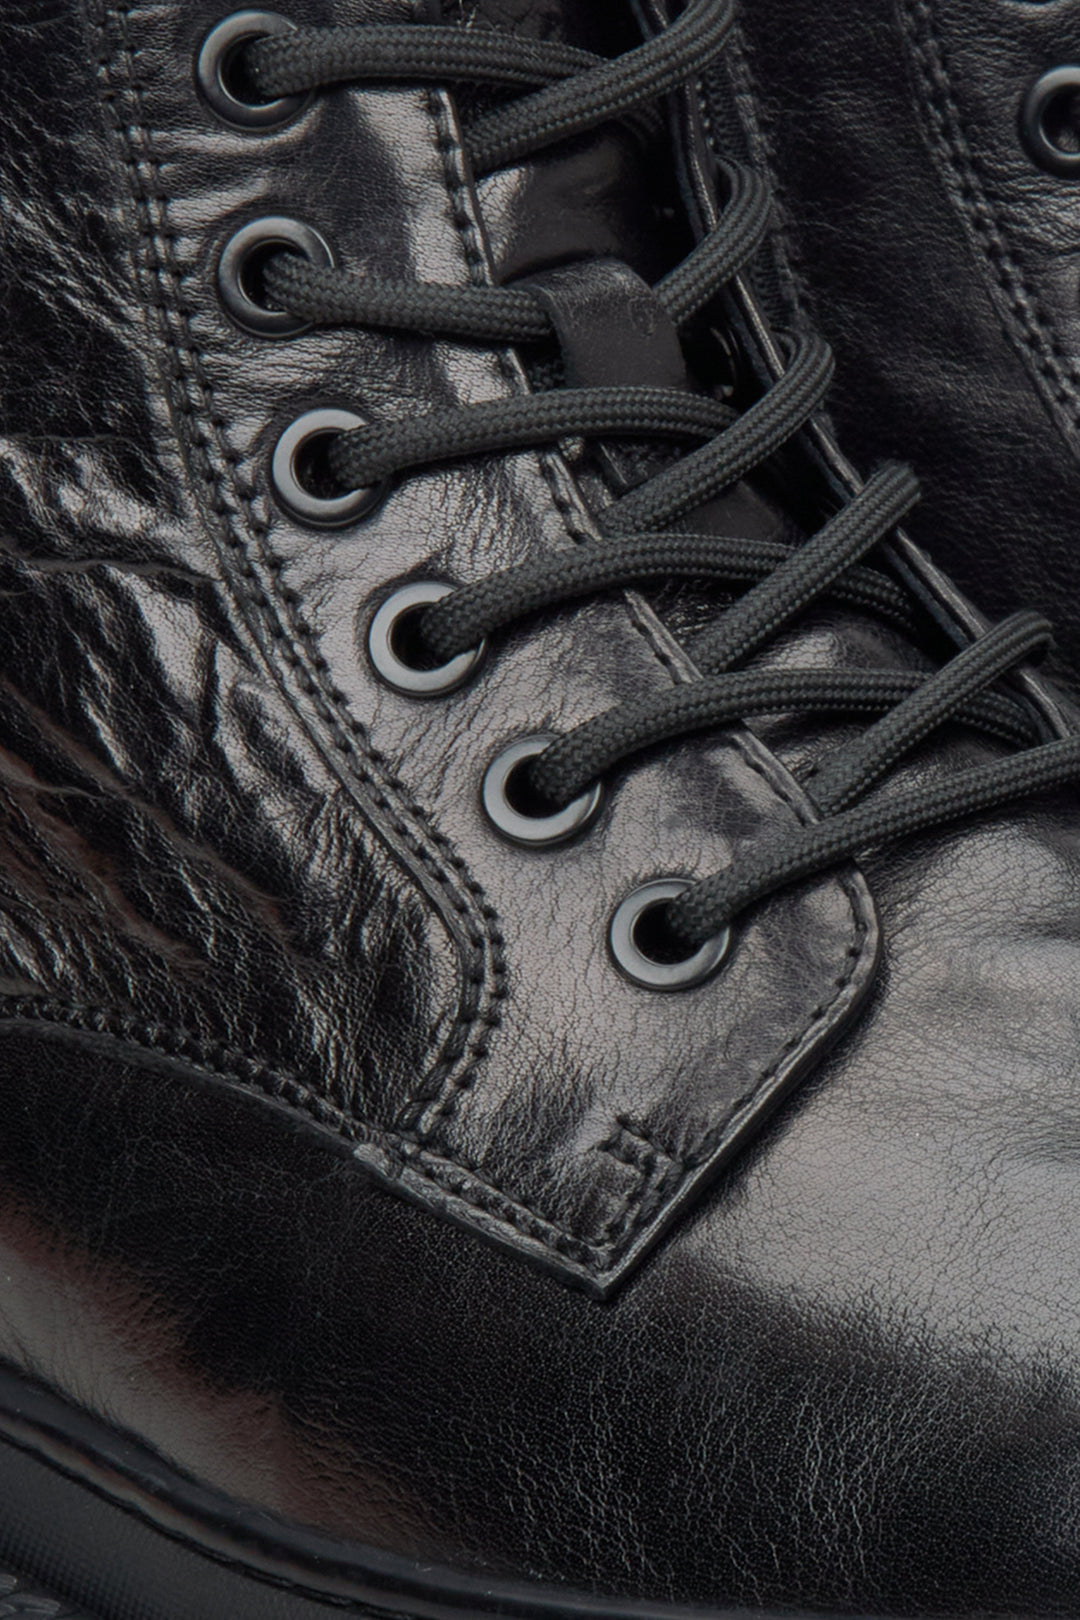 Men's black boots by Estro made of patent genuine leather - close-up on details.